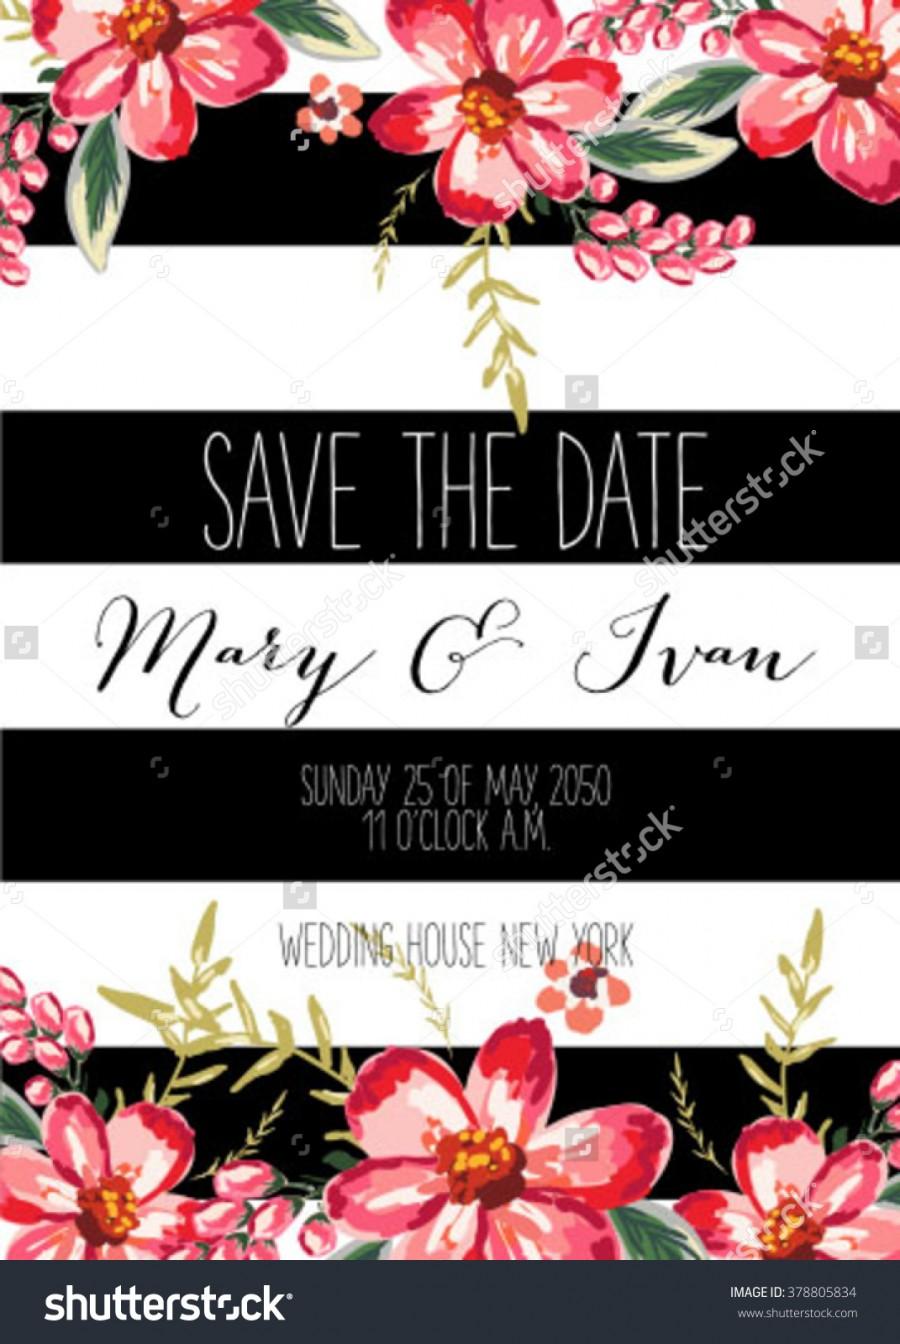 Mariage - Save the date design. Wedding invitation with flowers.